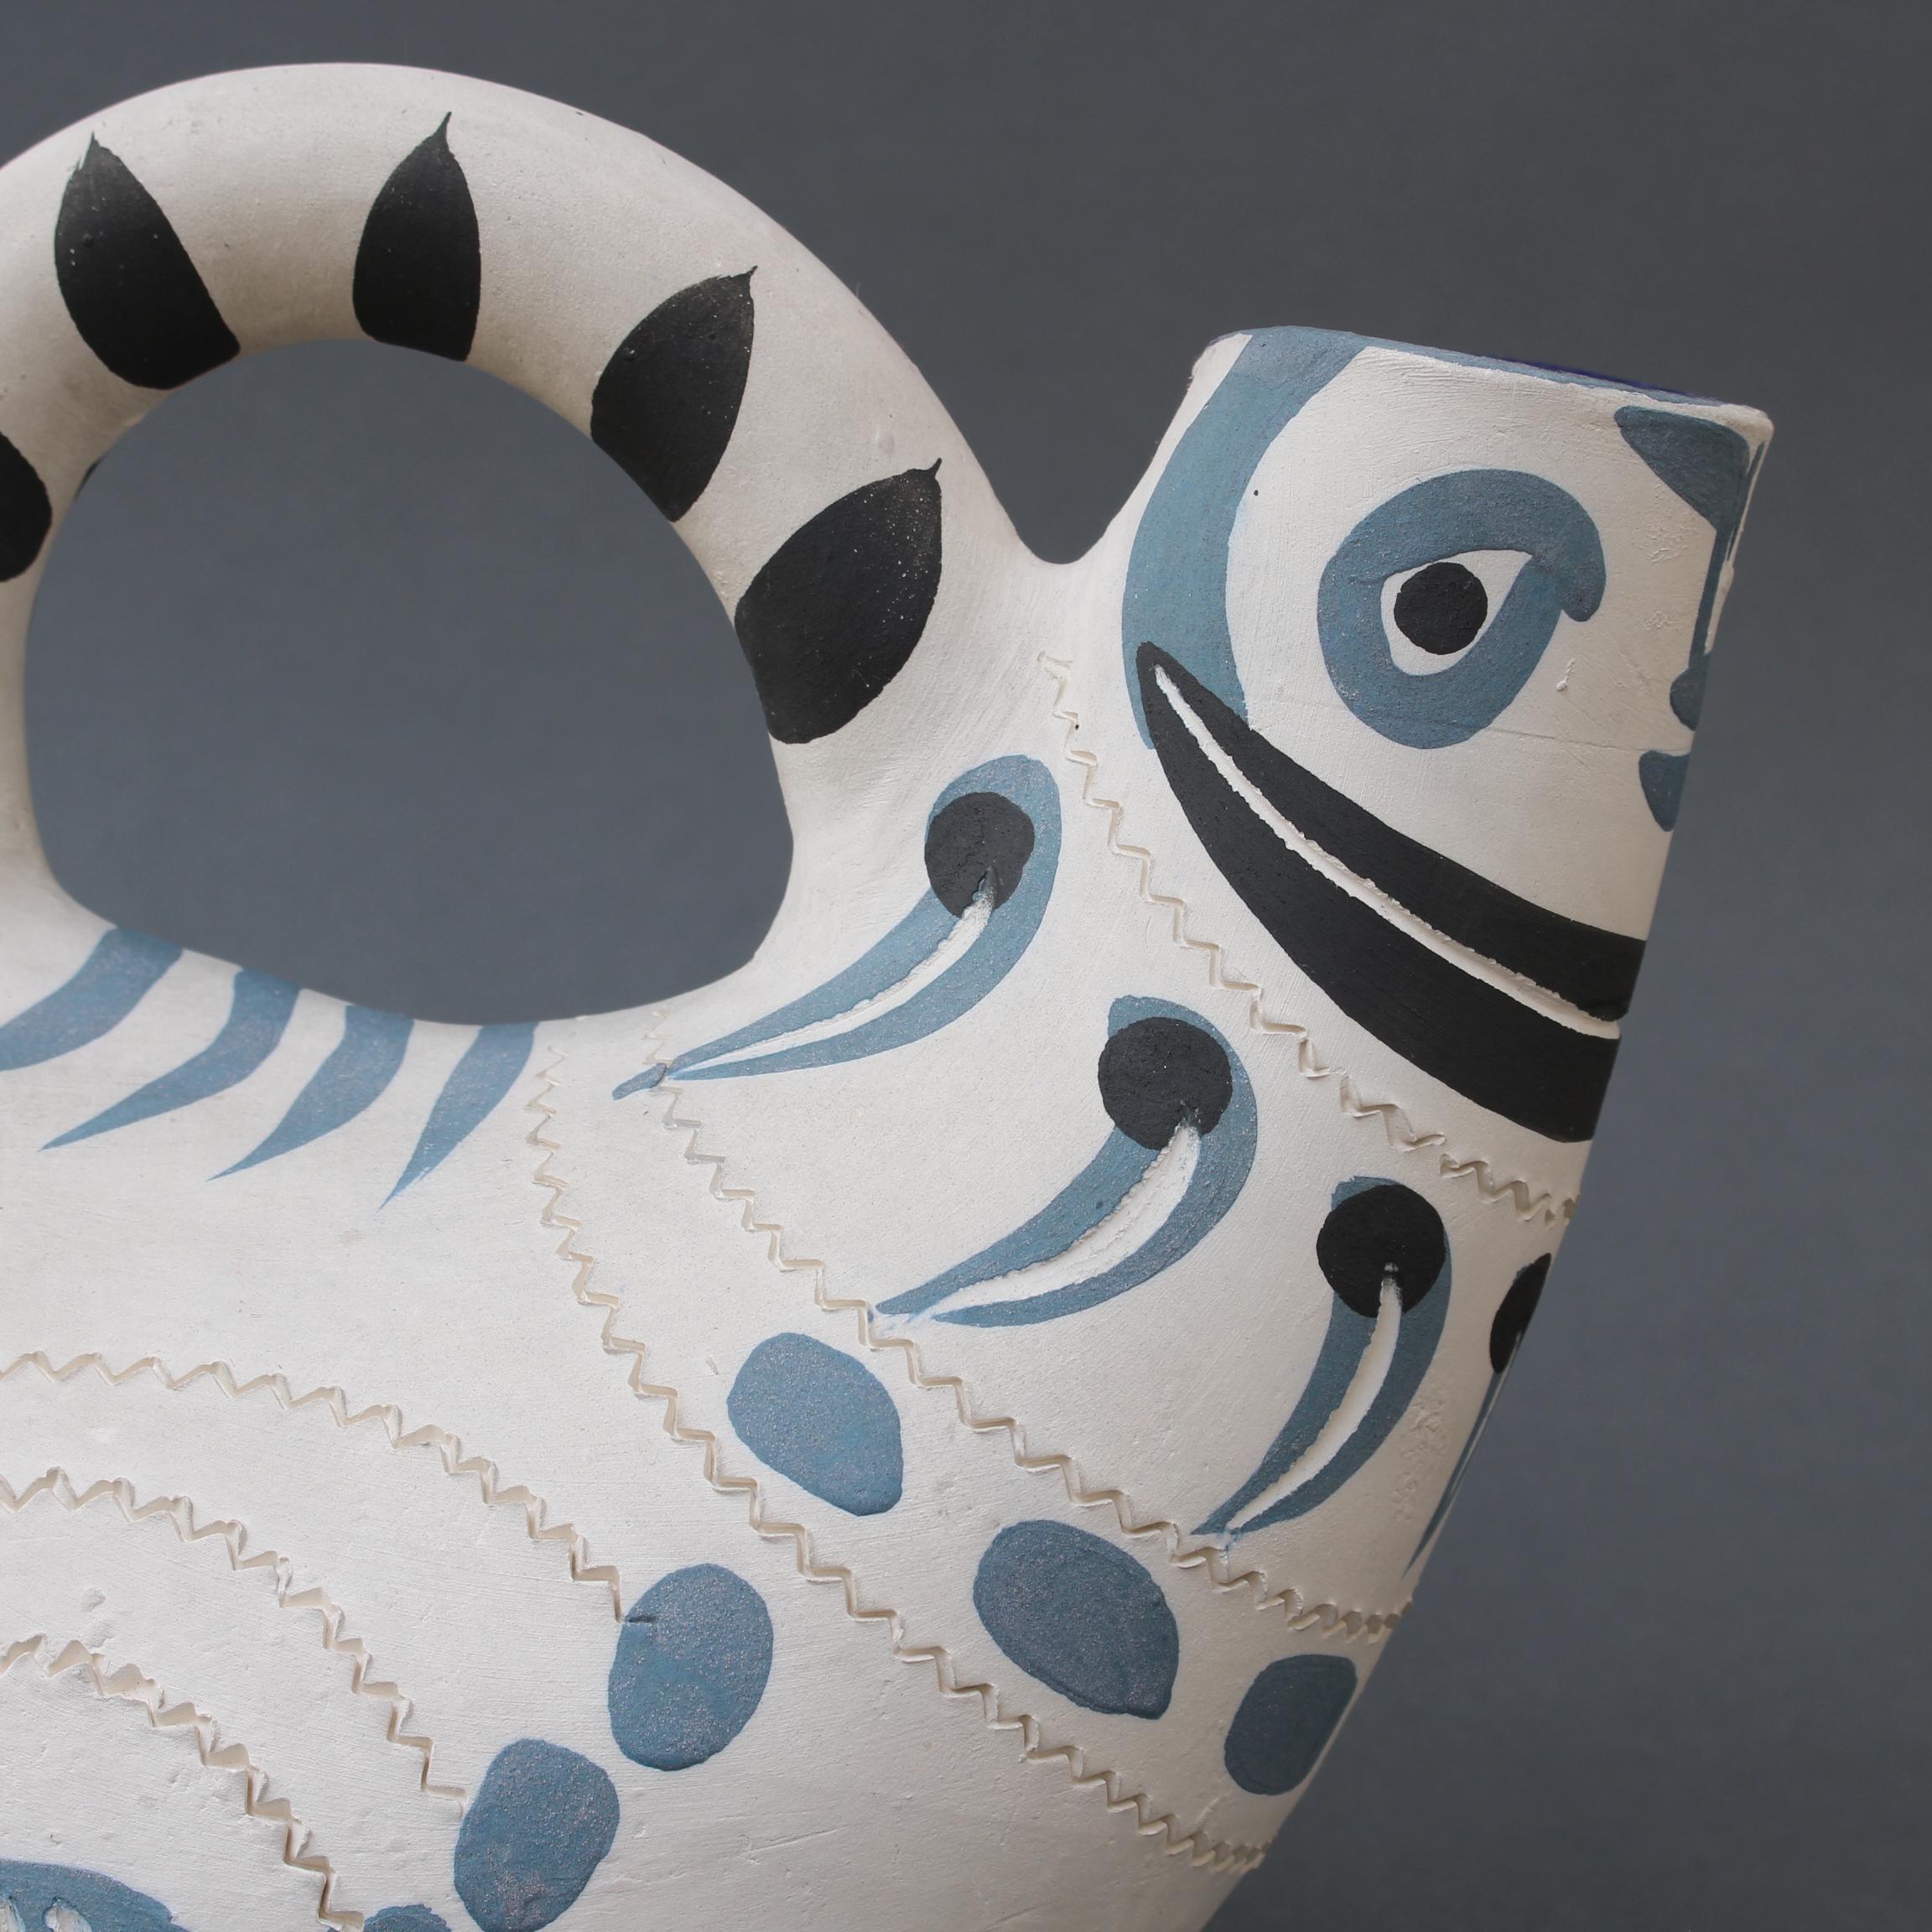 Hand-Painted 'Pichet Espagnol' from the Madoura Pottery 'AR 245' by Pablo Picasso '1954' For Sale